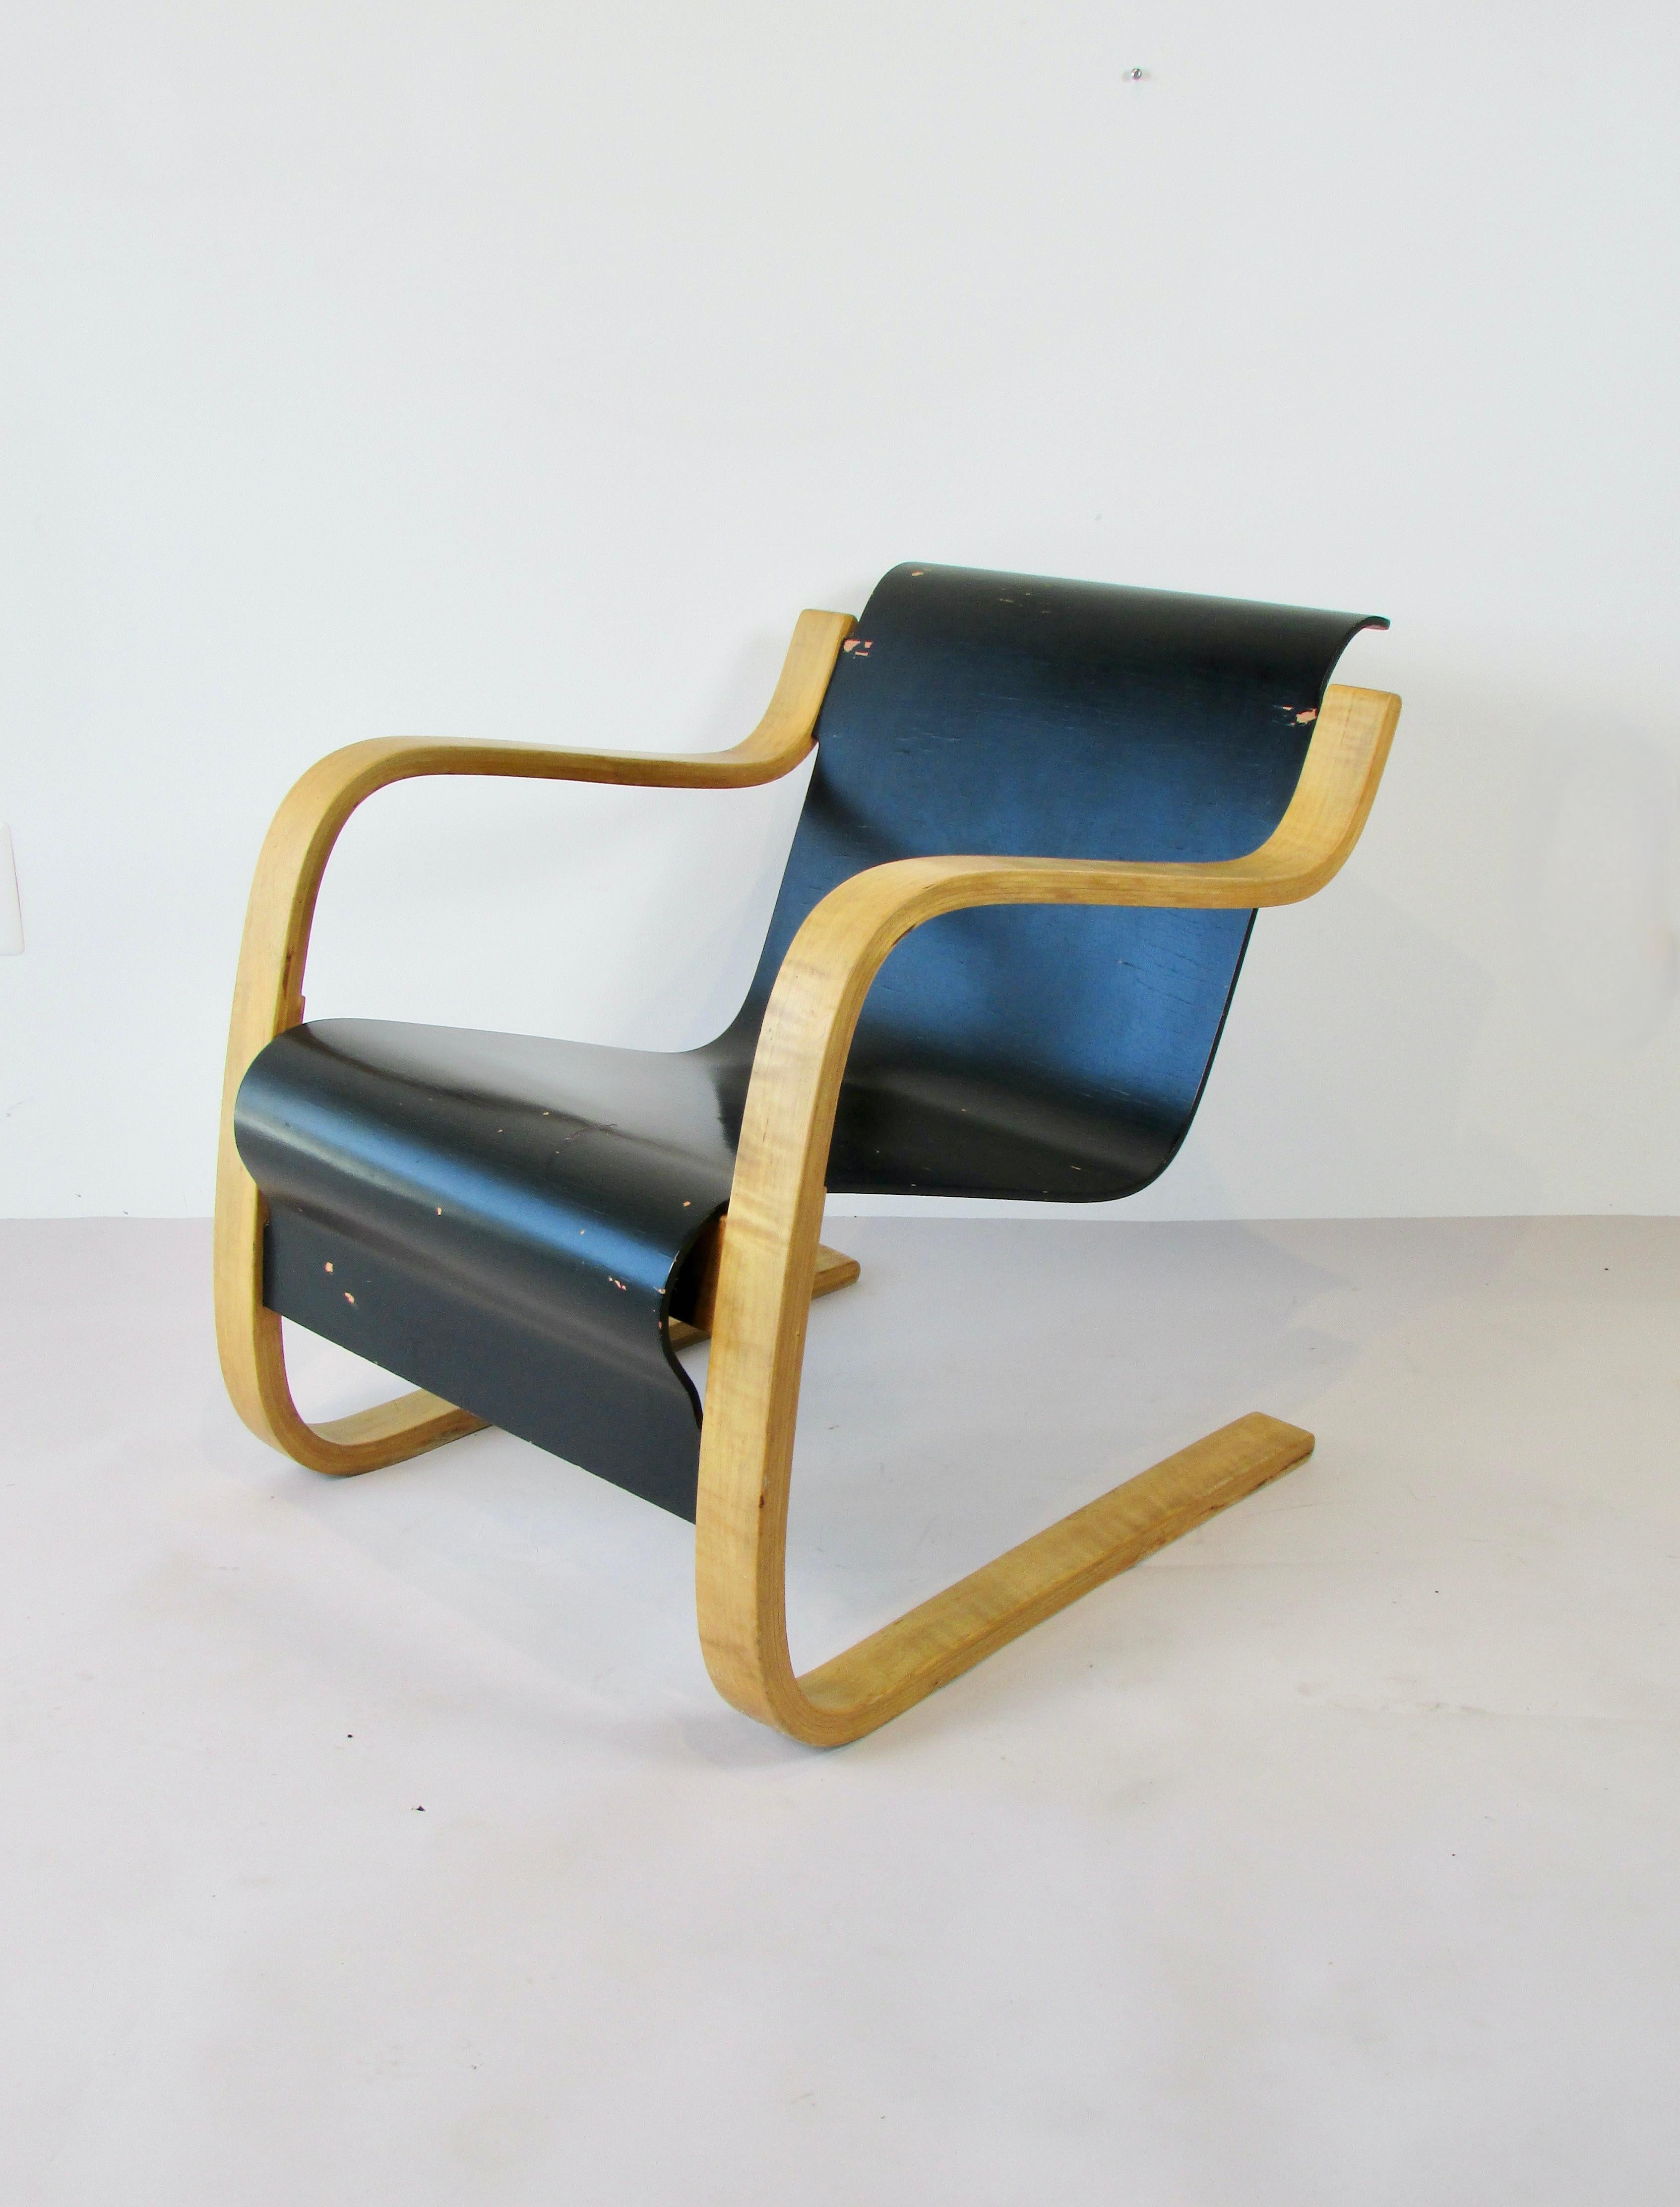 20th Century Alvar Aalto Model 31 Cantilevered Lounge Chair For Sale